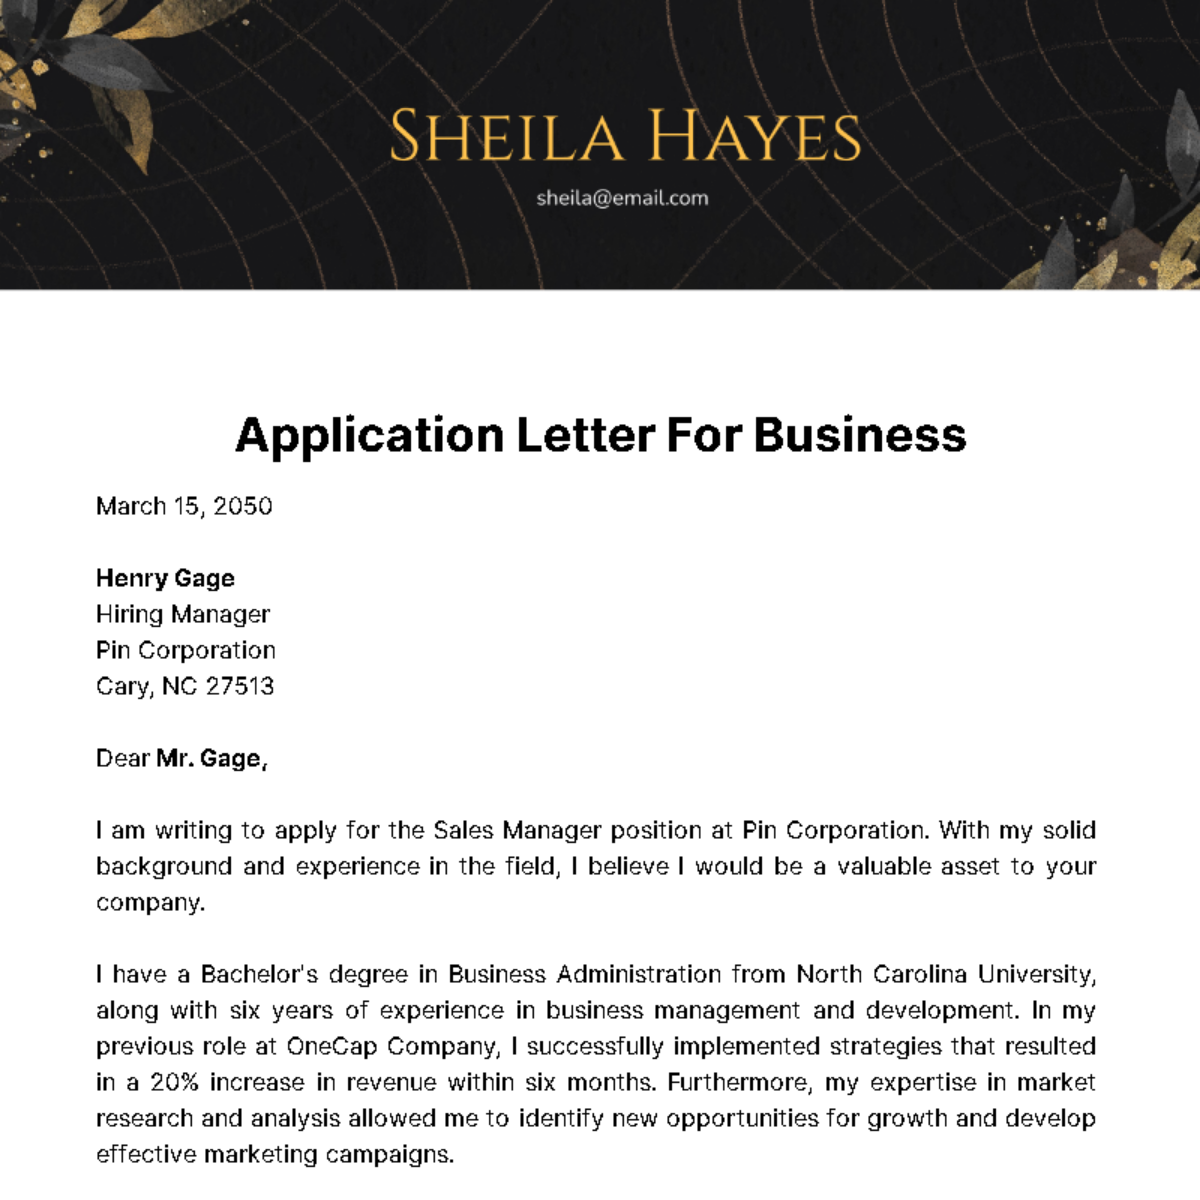 Application Letter for Business Template